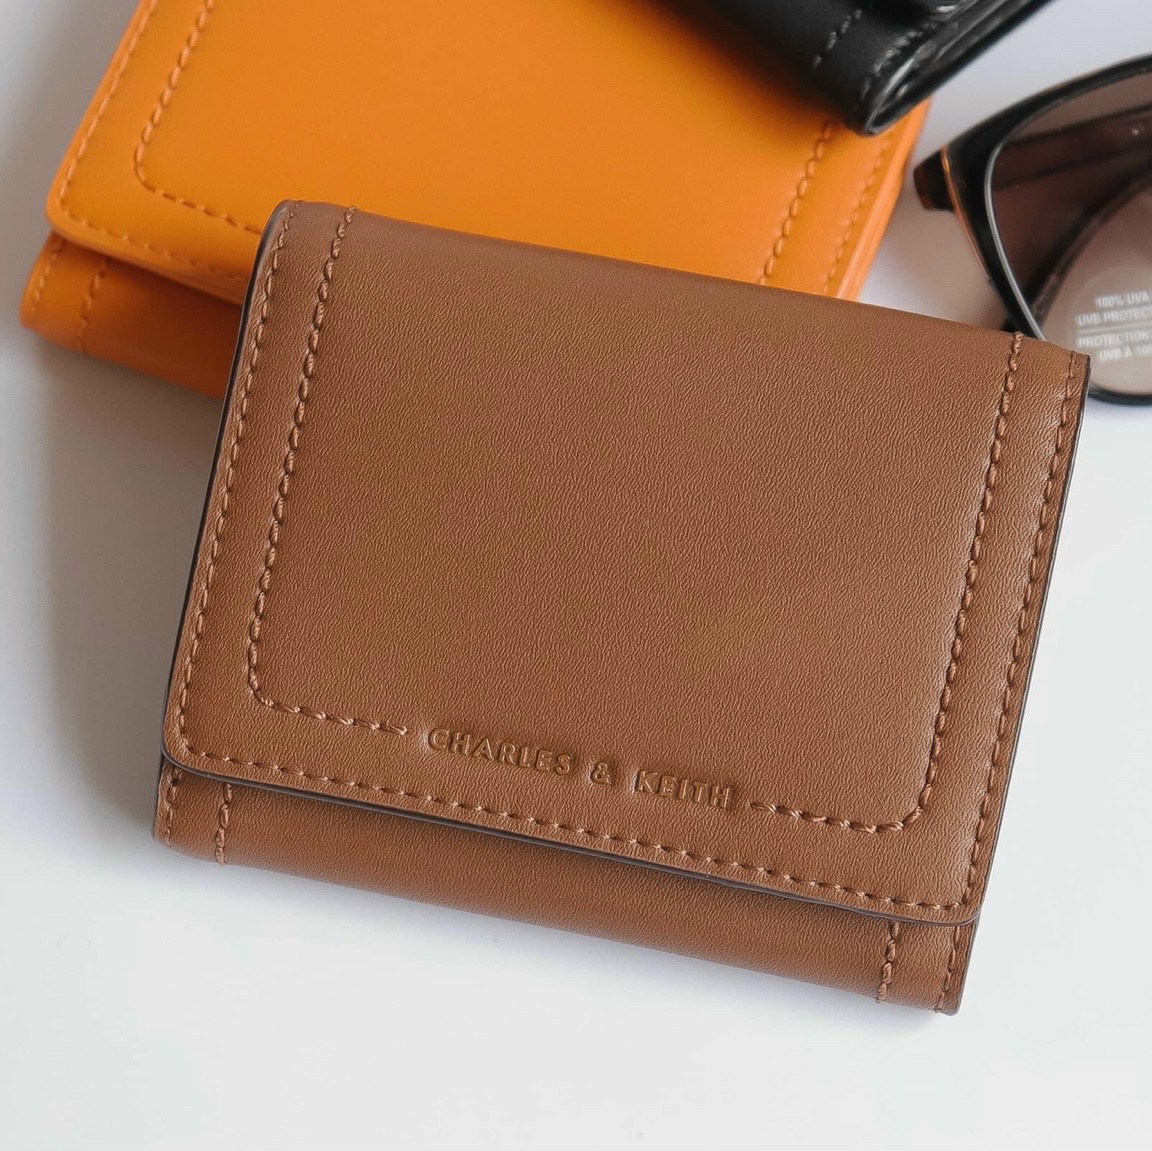 VÍ CHARLES KEITH SONNET SNAP BUTTON SMALL WALLET 32